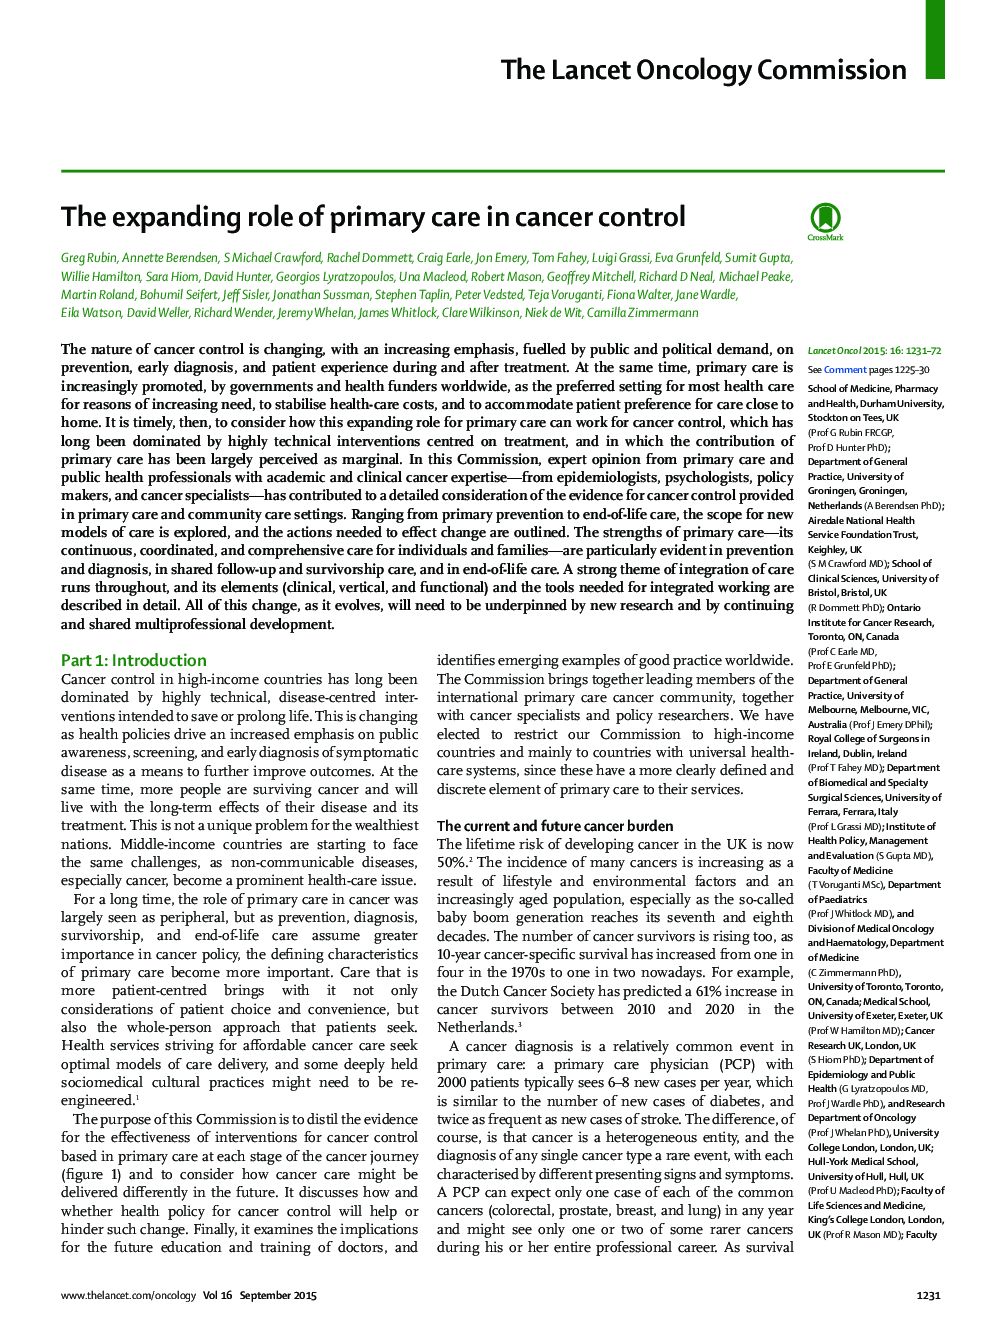 The expanding role of primary care in cancer control